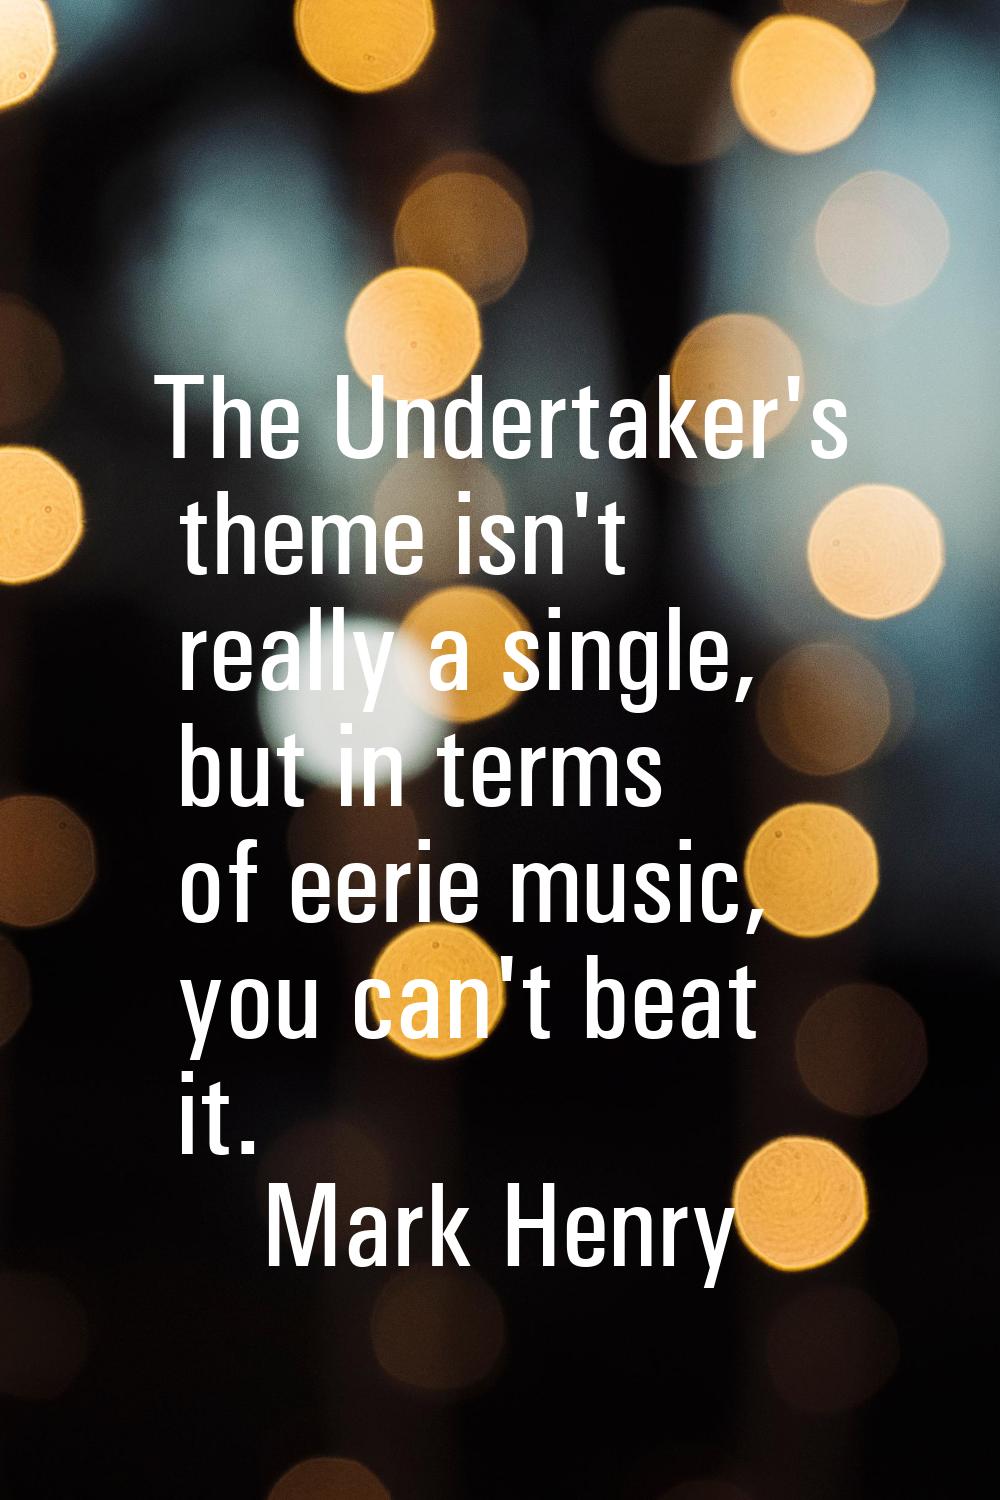 The Undertaker's theme isn't really a single, but in terms of eerie music, you can't beat it.